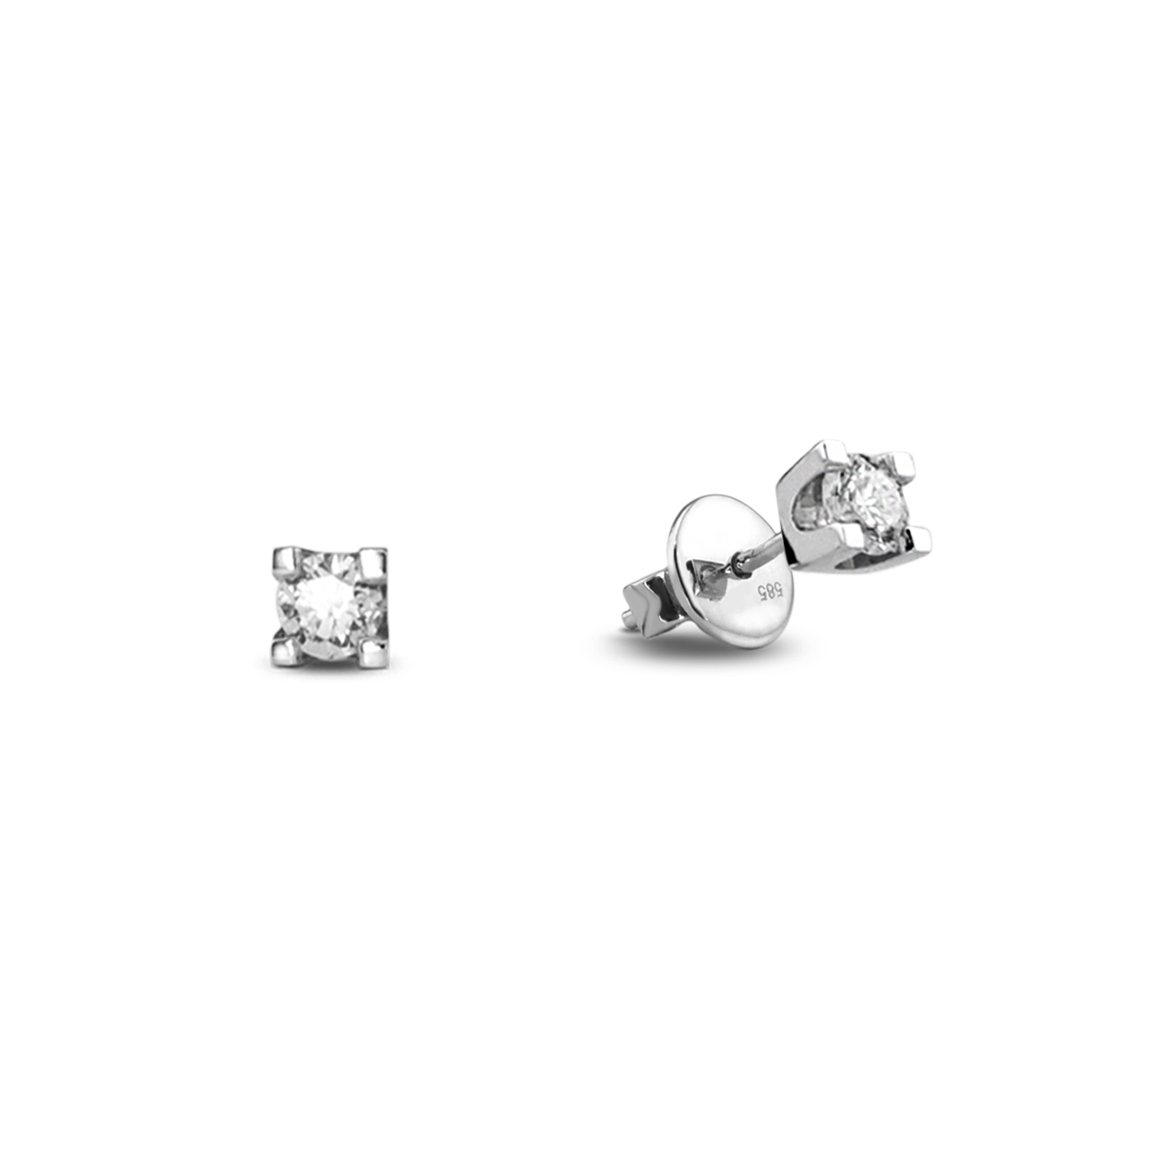 White Pear And Round Brilliant Cut Diamond Earring